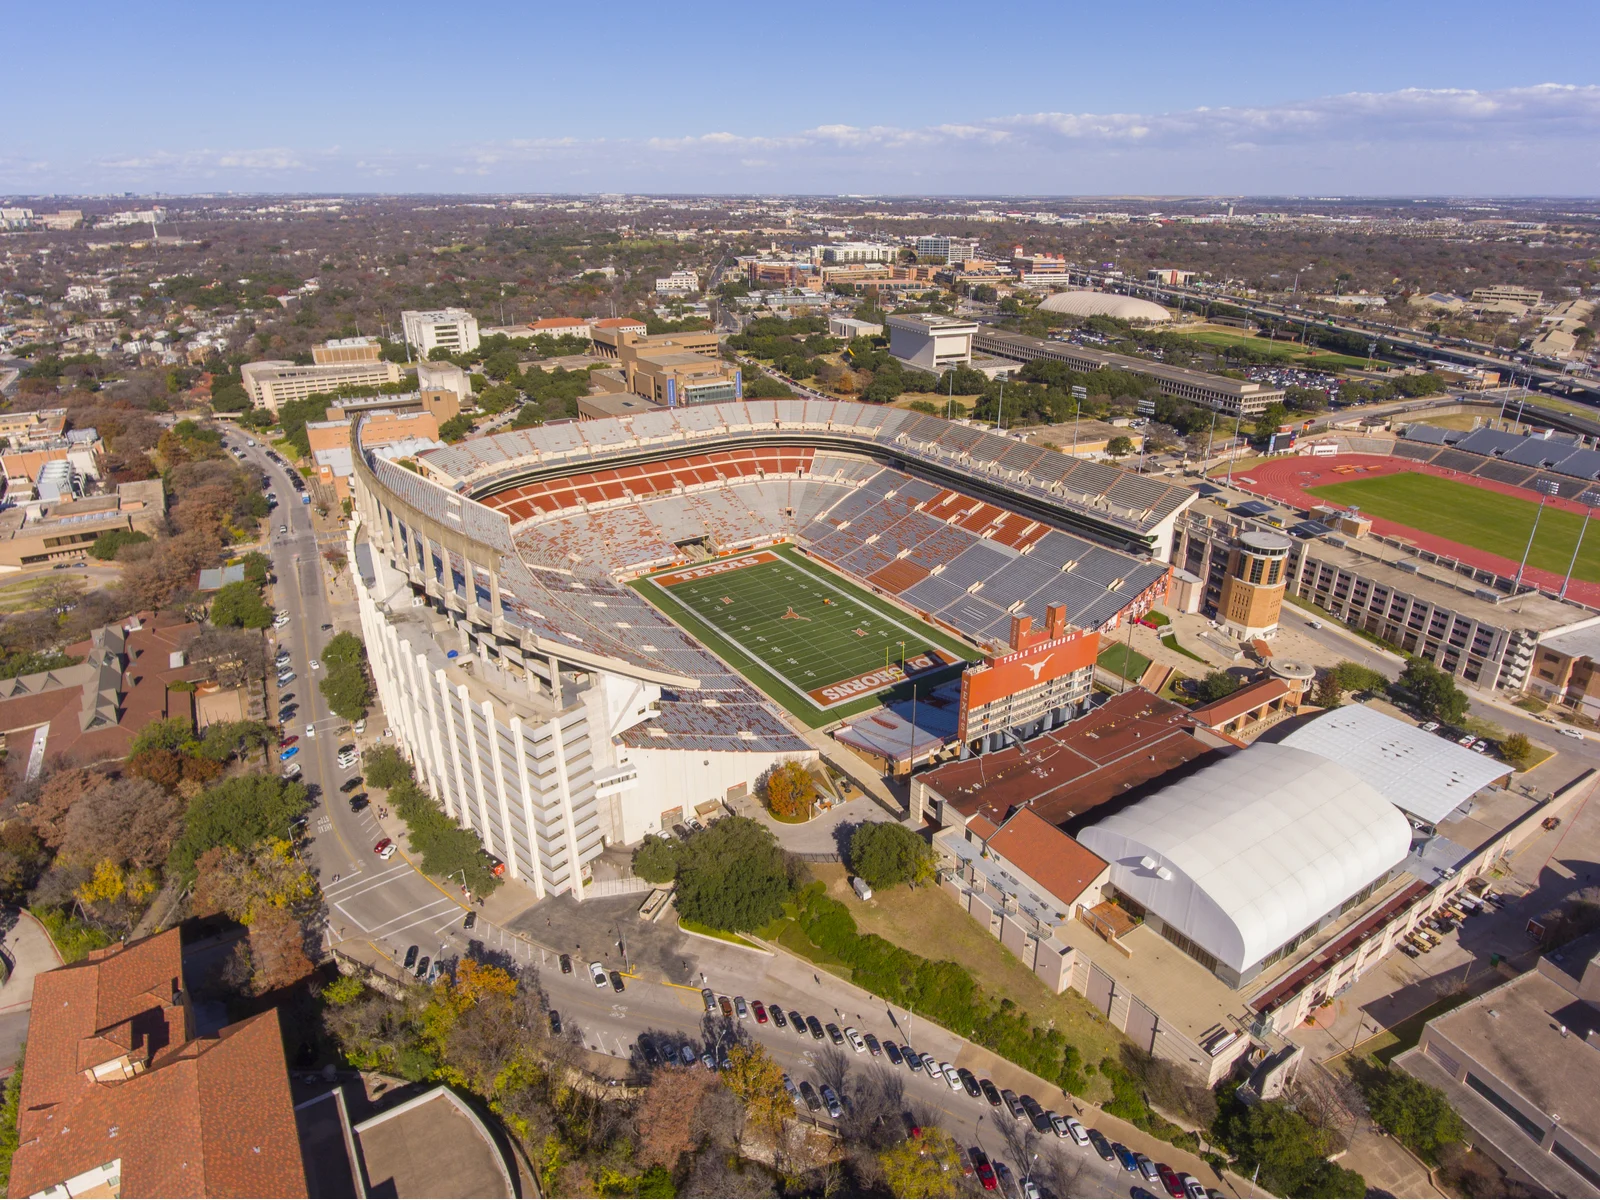 Darrell K. Royal – Texas Memorial Stadium, one of the best things to do in Austin